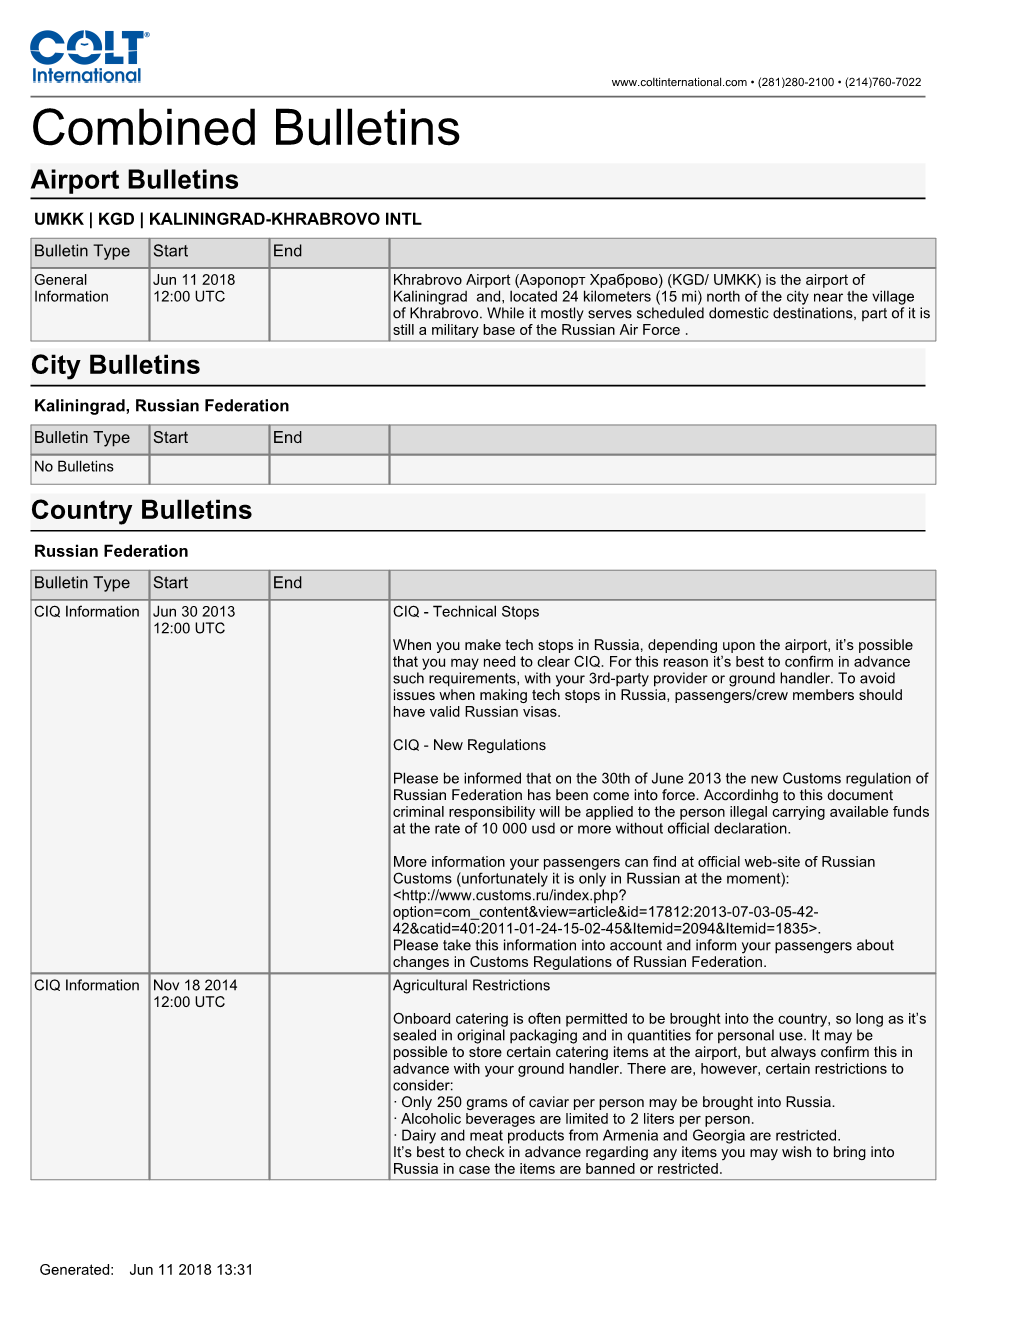 Combined Bulletins Airport Bulletins